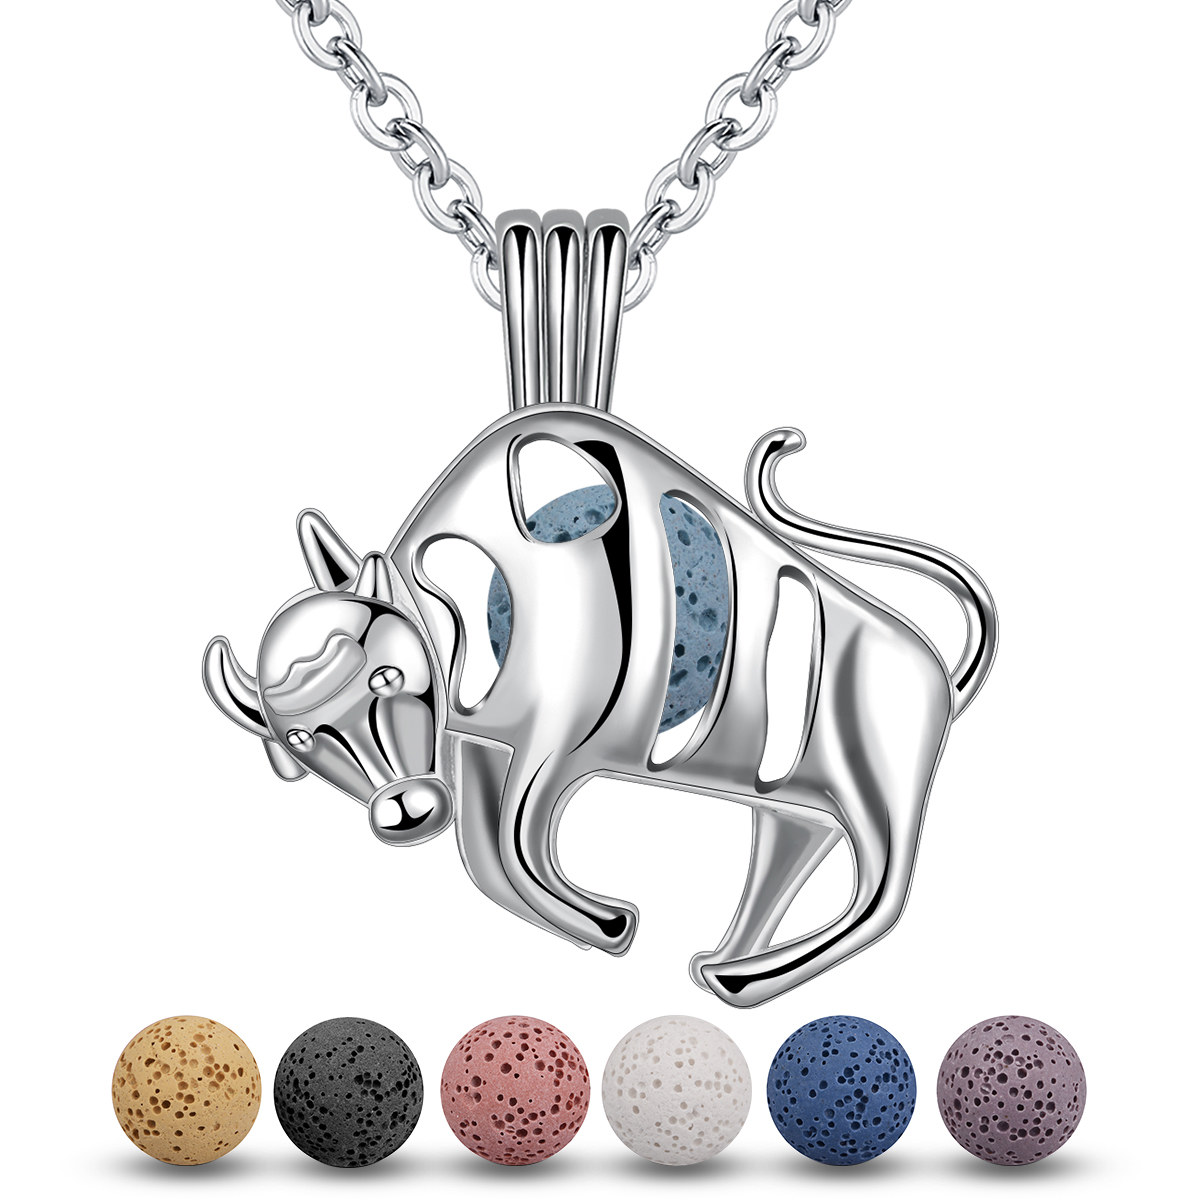 Merryshine Jewelry bull shaped s925 sterling silver cage lava stone diffuser aromatherapy necklace